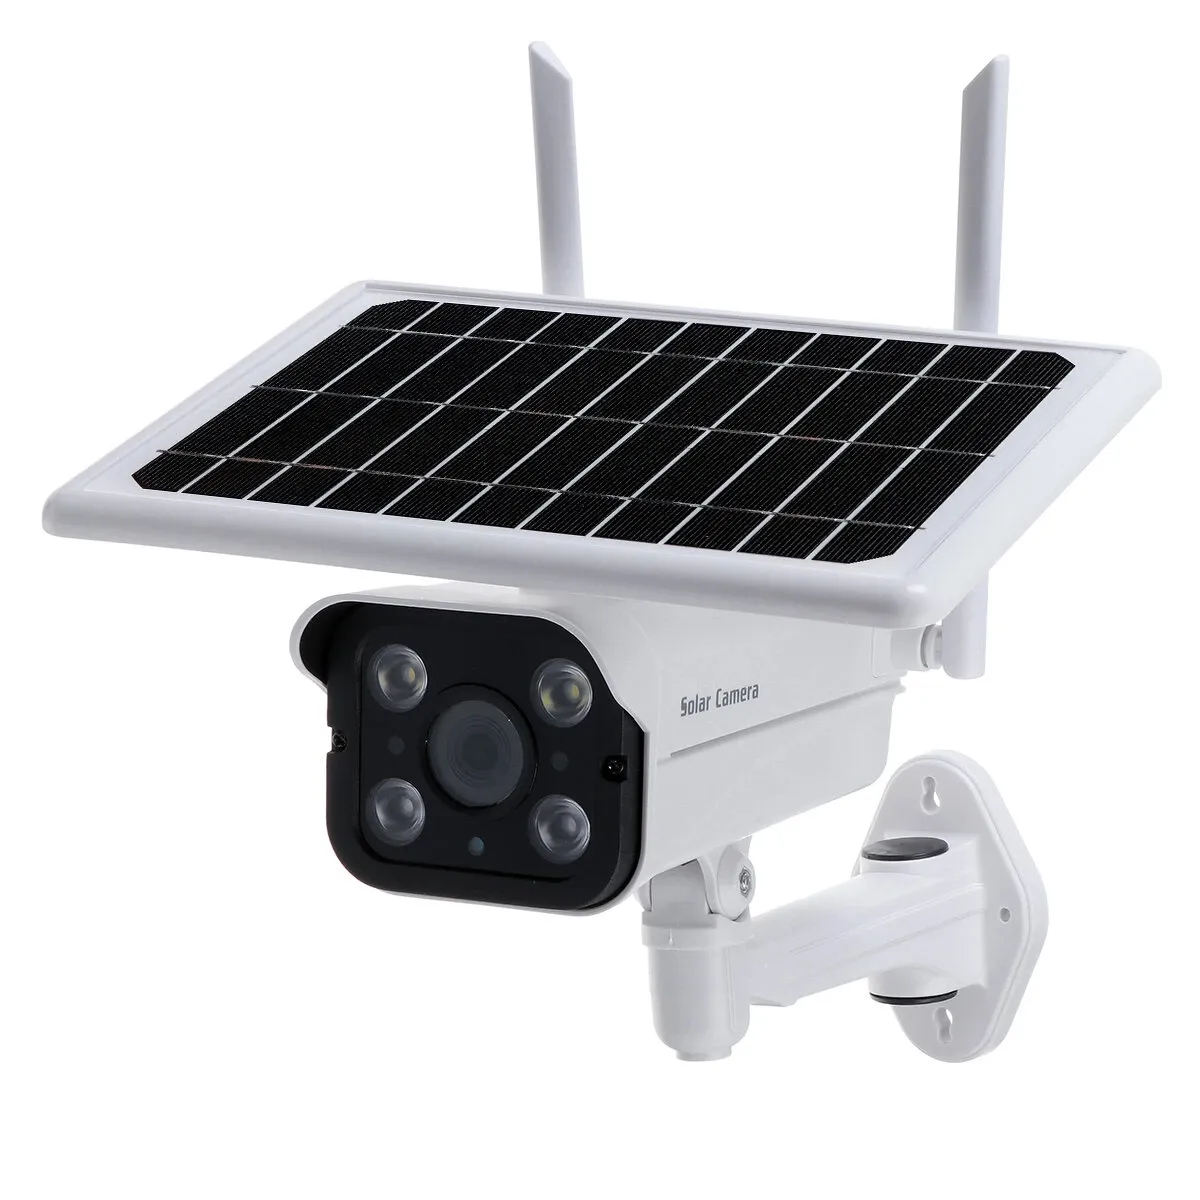 HD 4G Security Network WiFi Intelligent Camera Outdoor Home Solar Wireless Monitor Camera - WIFI PLUS Edition